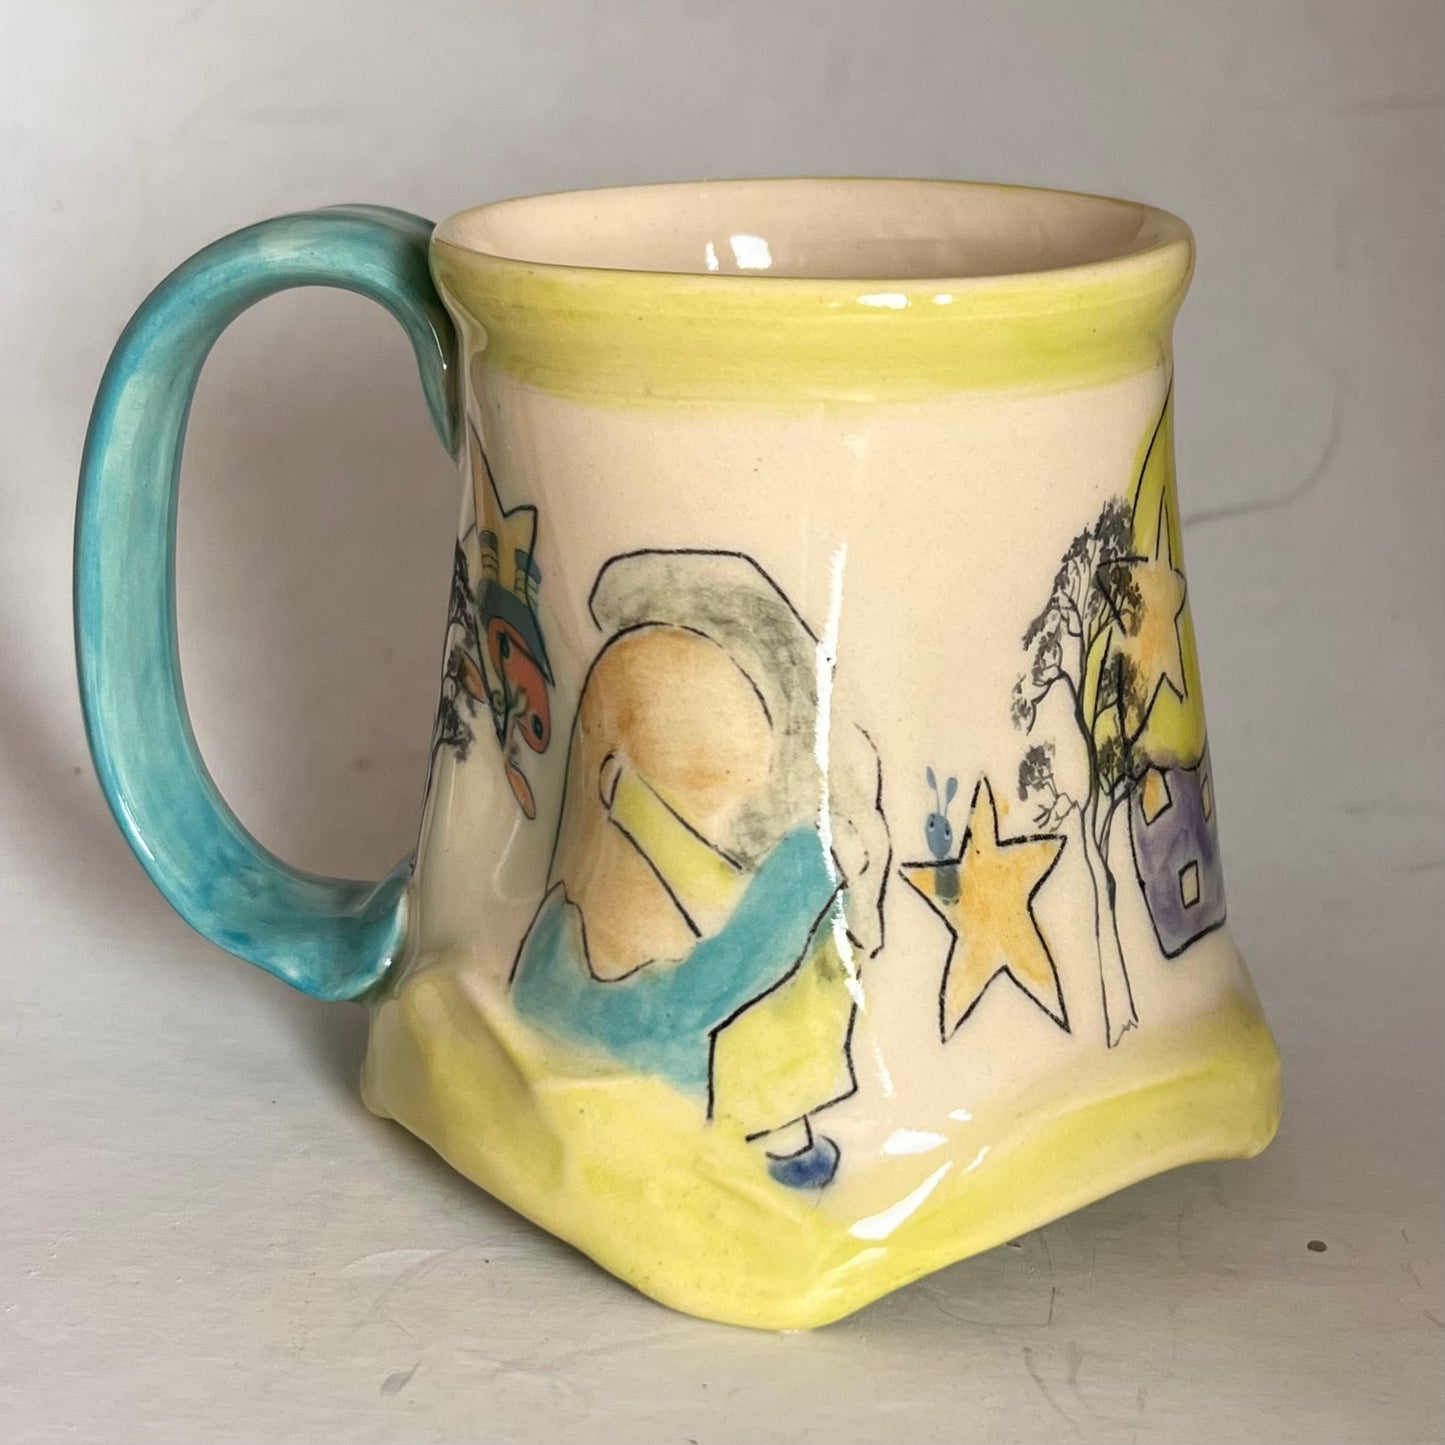 Sold - Friends are always in our heart, mug